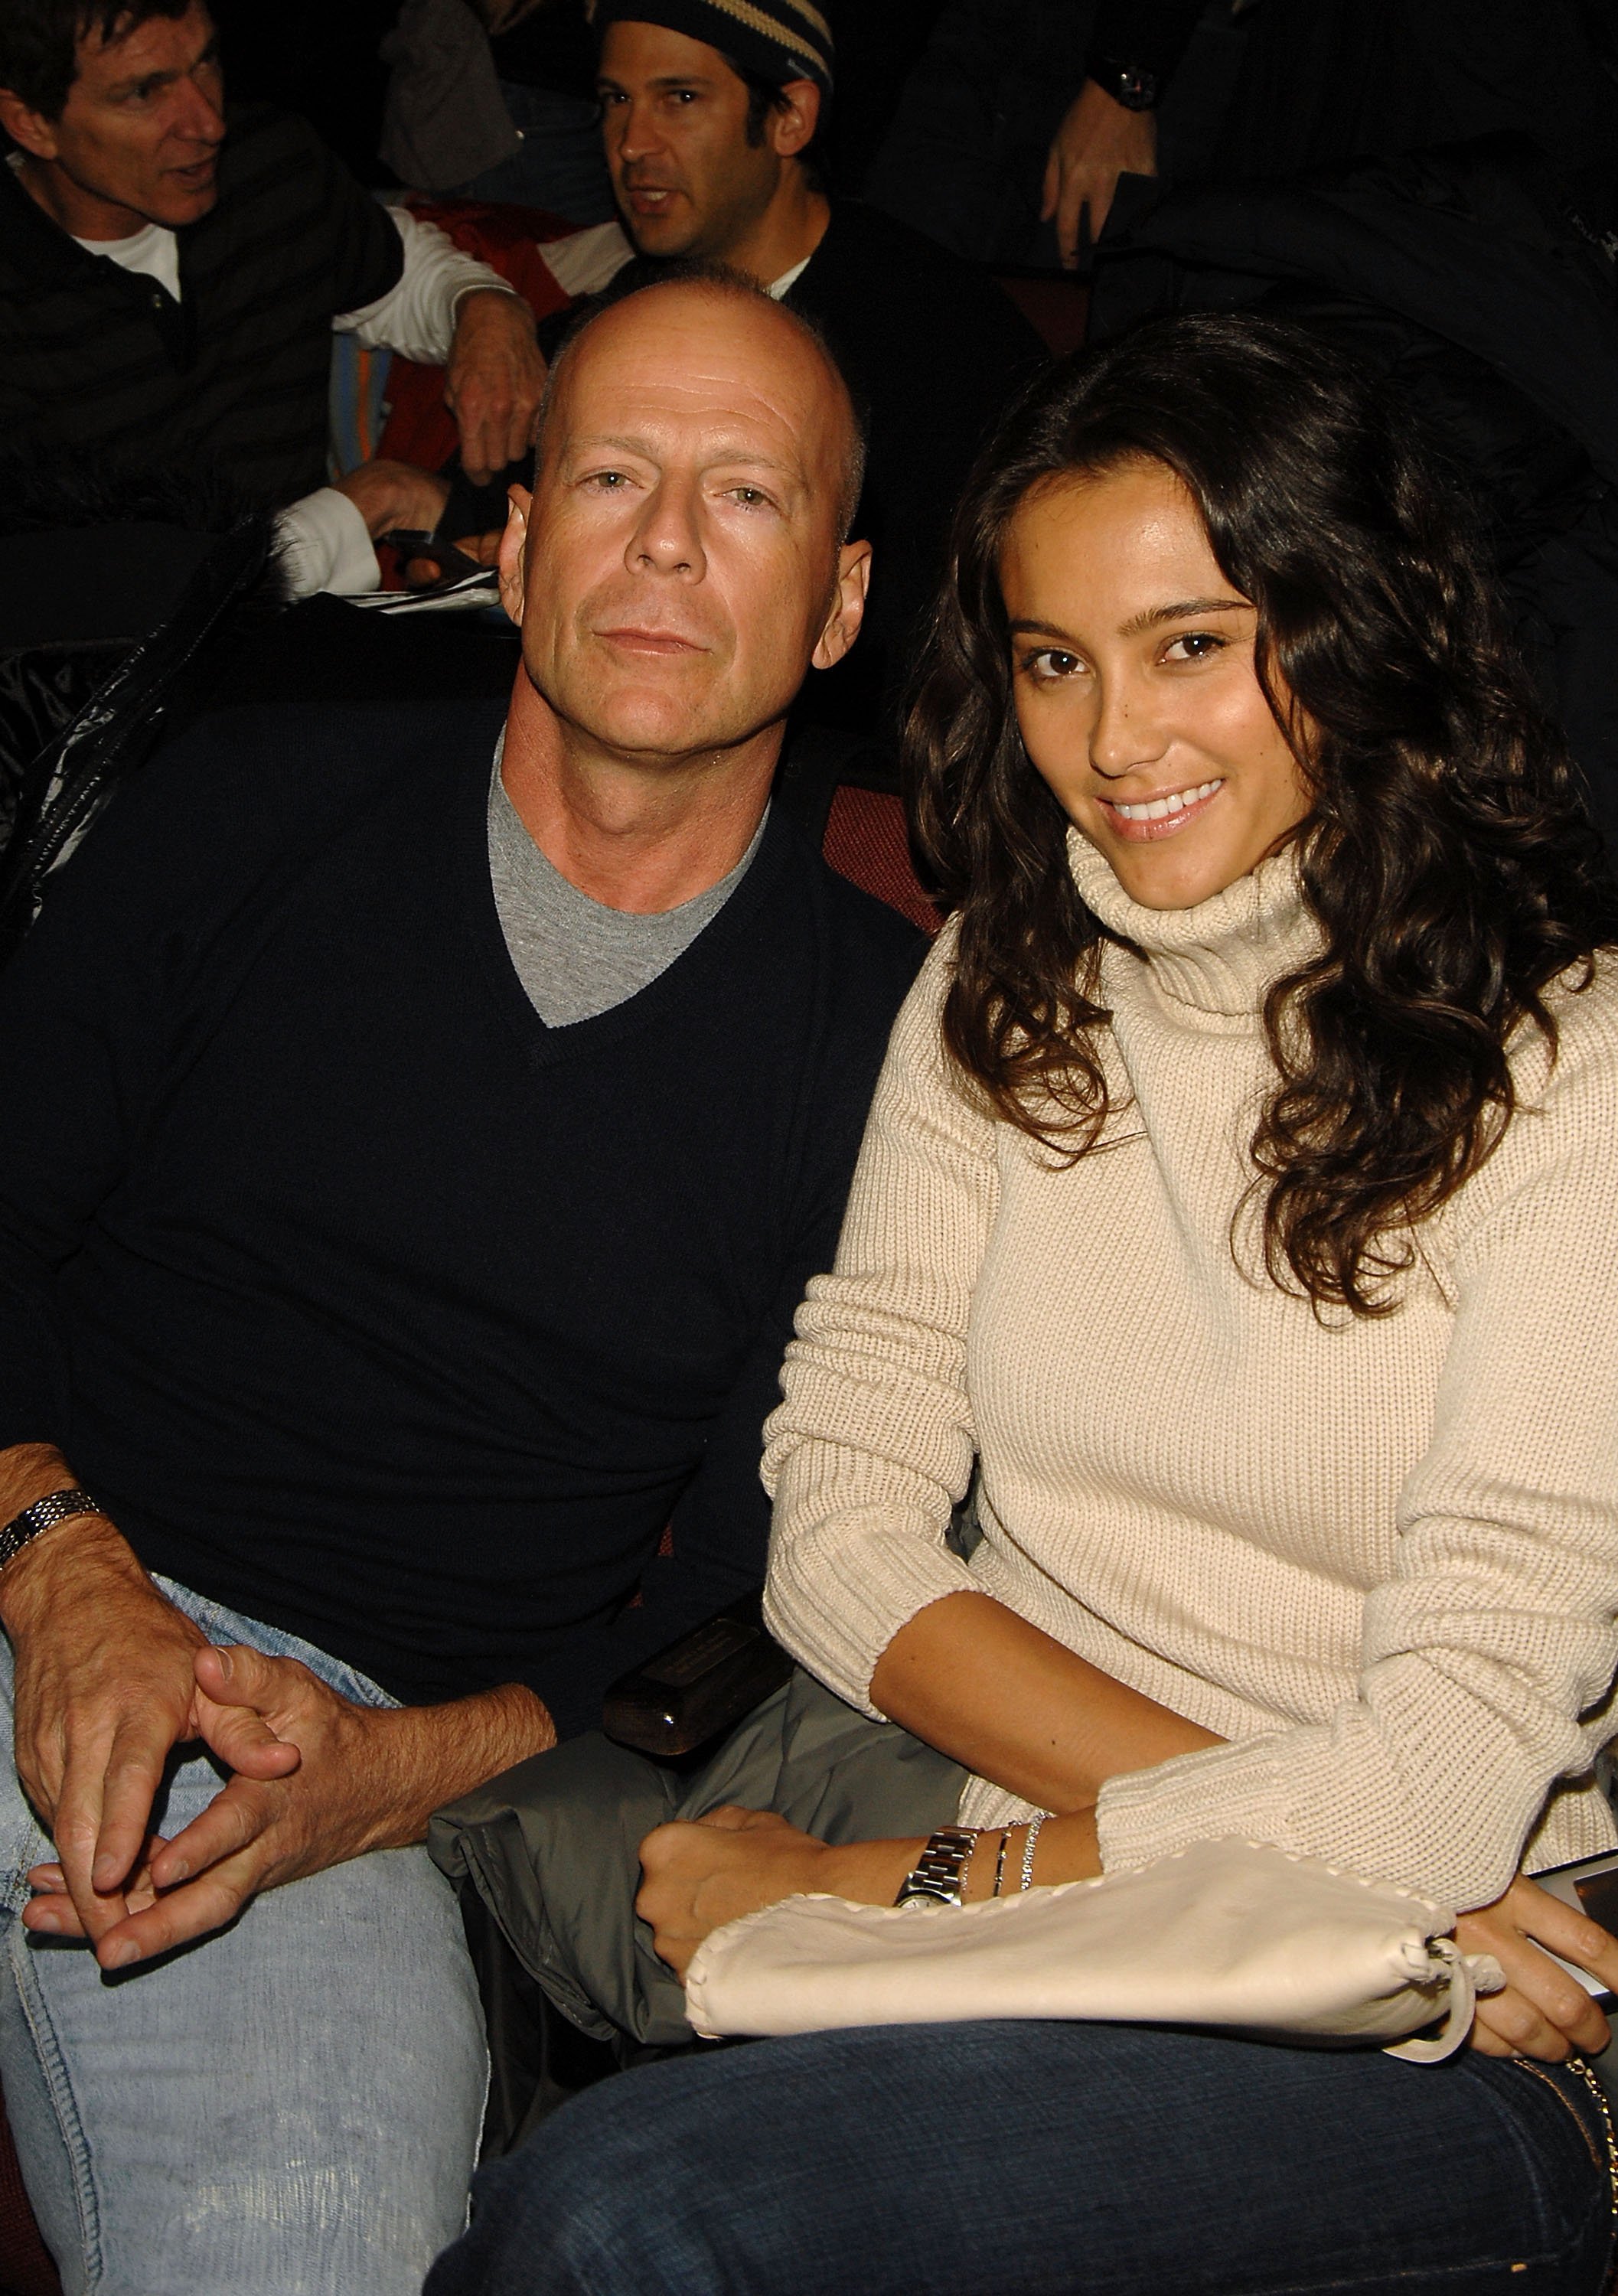 Bruce Willis and Emma Heming attend "What Just Happened?" premiere during 2008 Sundance Film Festival at the Eccles Theatre on January 19, 2008 in Park City, Utah | Source: Getty Images 